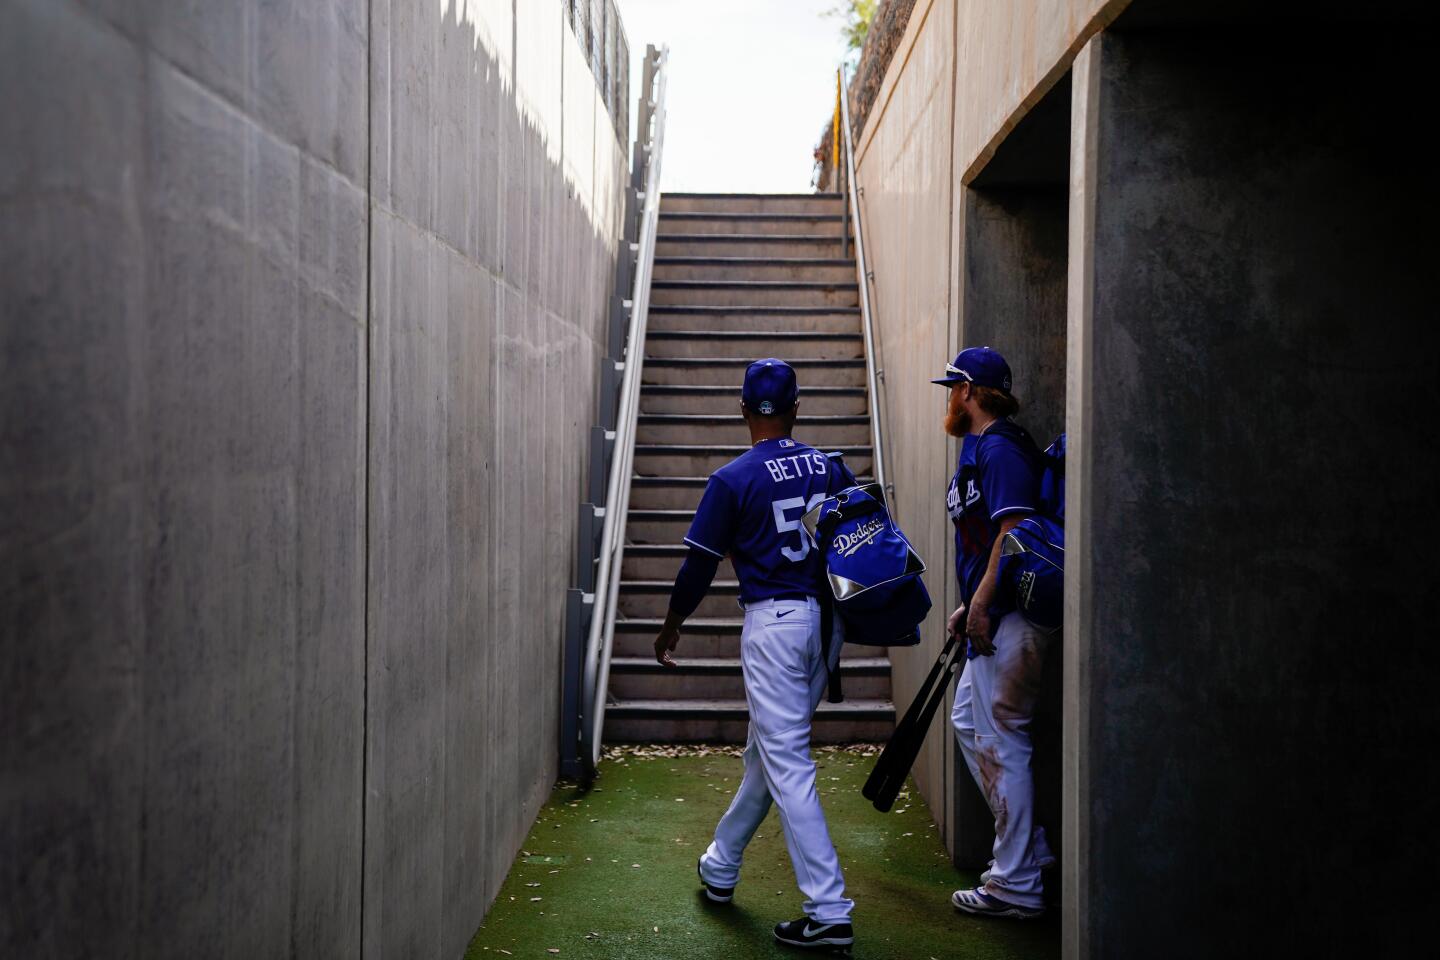 Dodgers right fielder Mookie Betts, left, and third baseman Justin Turner walk out of the tunnel after exiting an exhibition game against the Chicago Cubs in the top of the fifth inning at Camelback Ranch on Feb. 23, 2020.